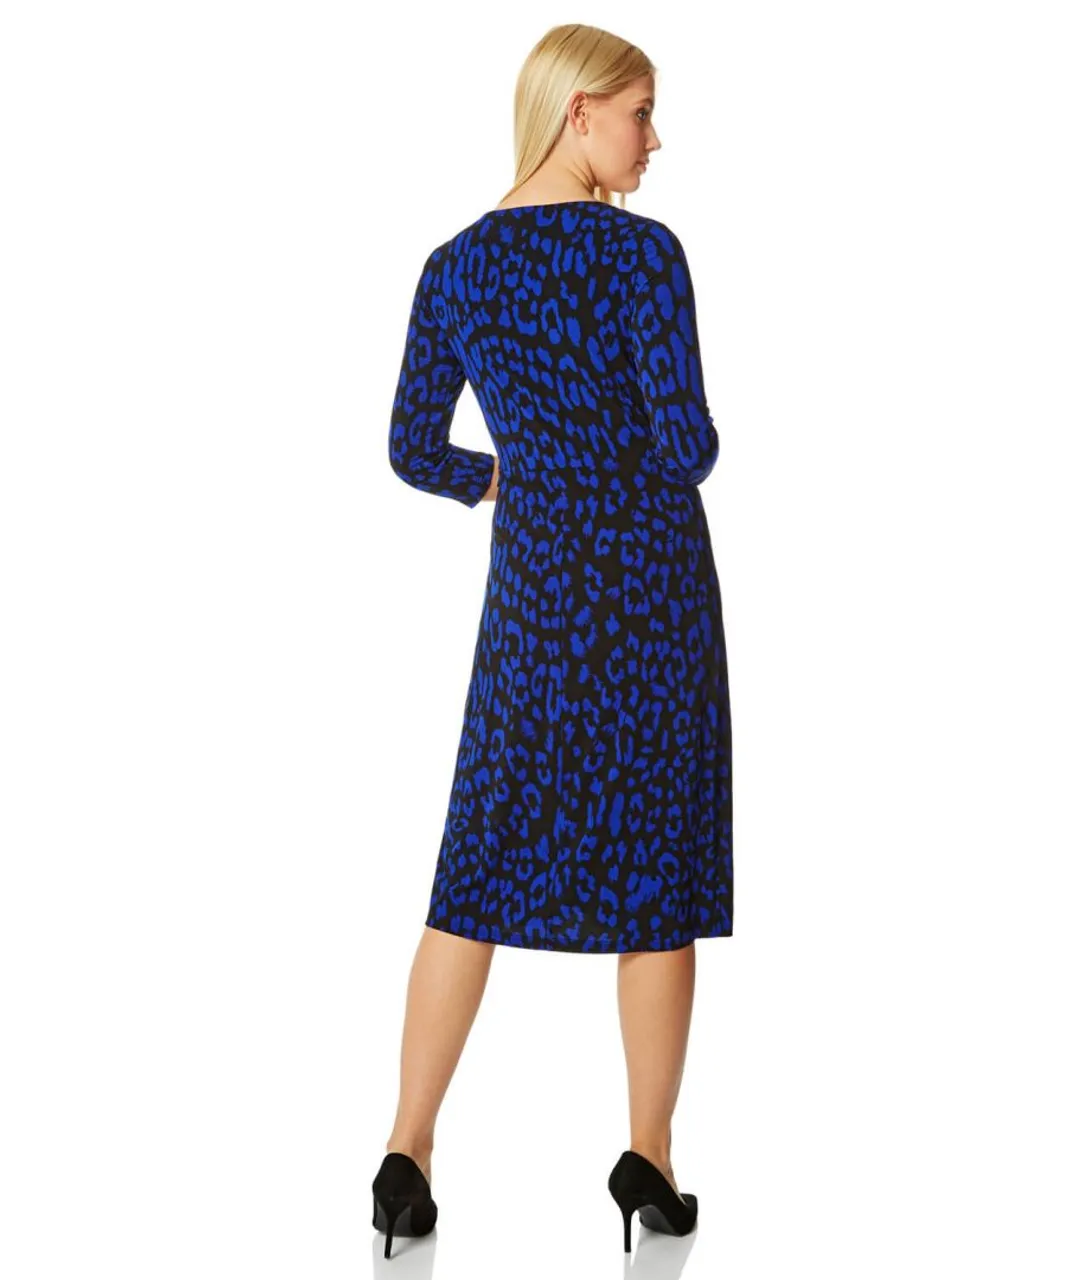 Roman Womens Animal Print Fit And Flare Dress - Blue